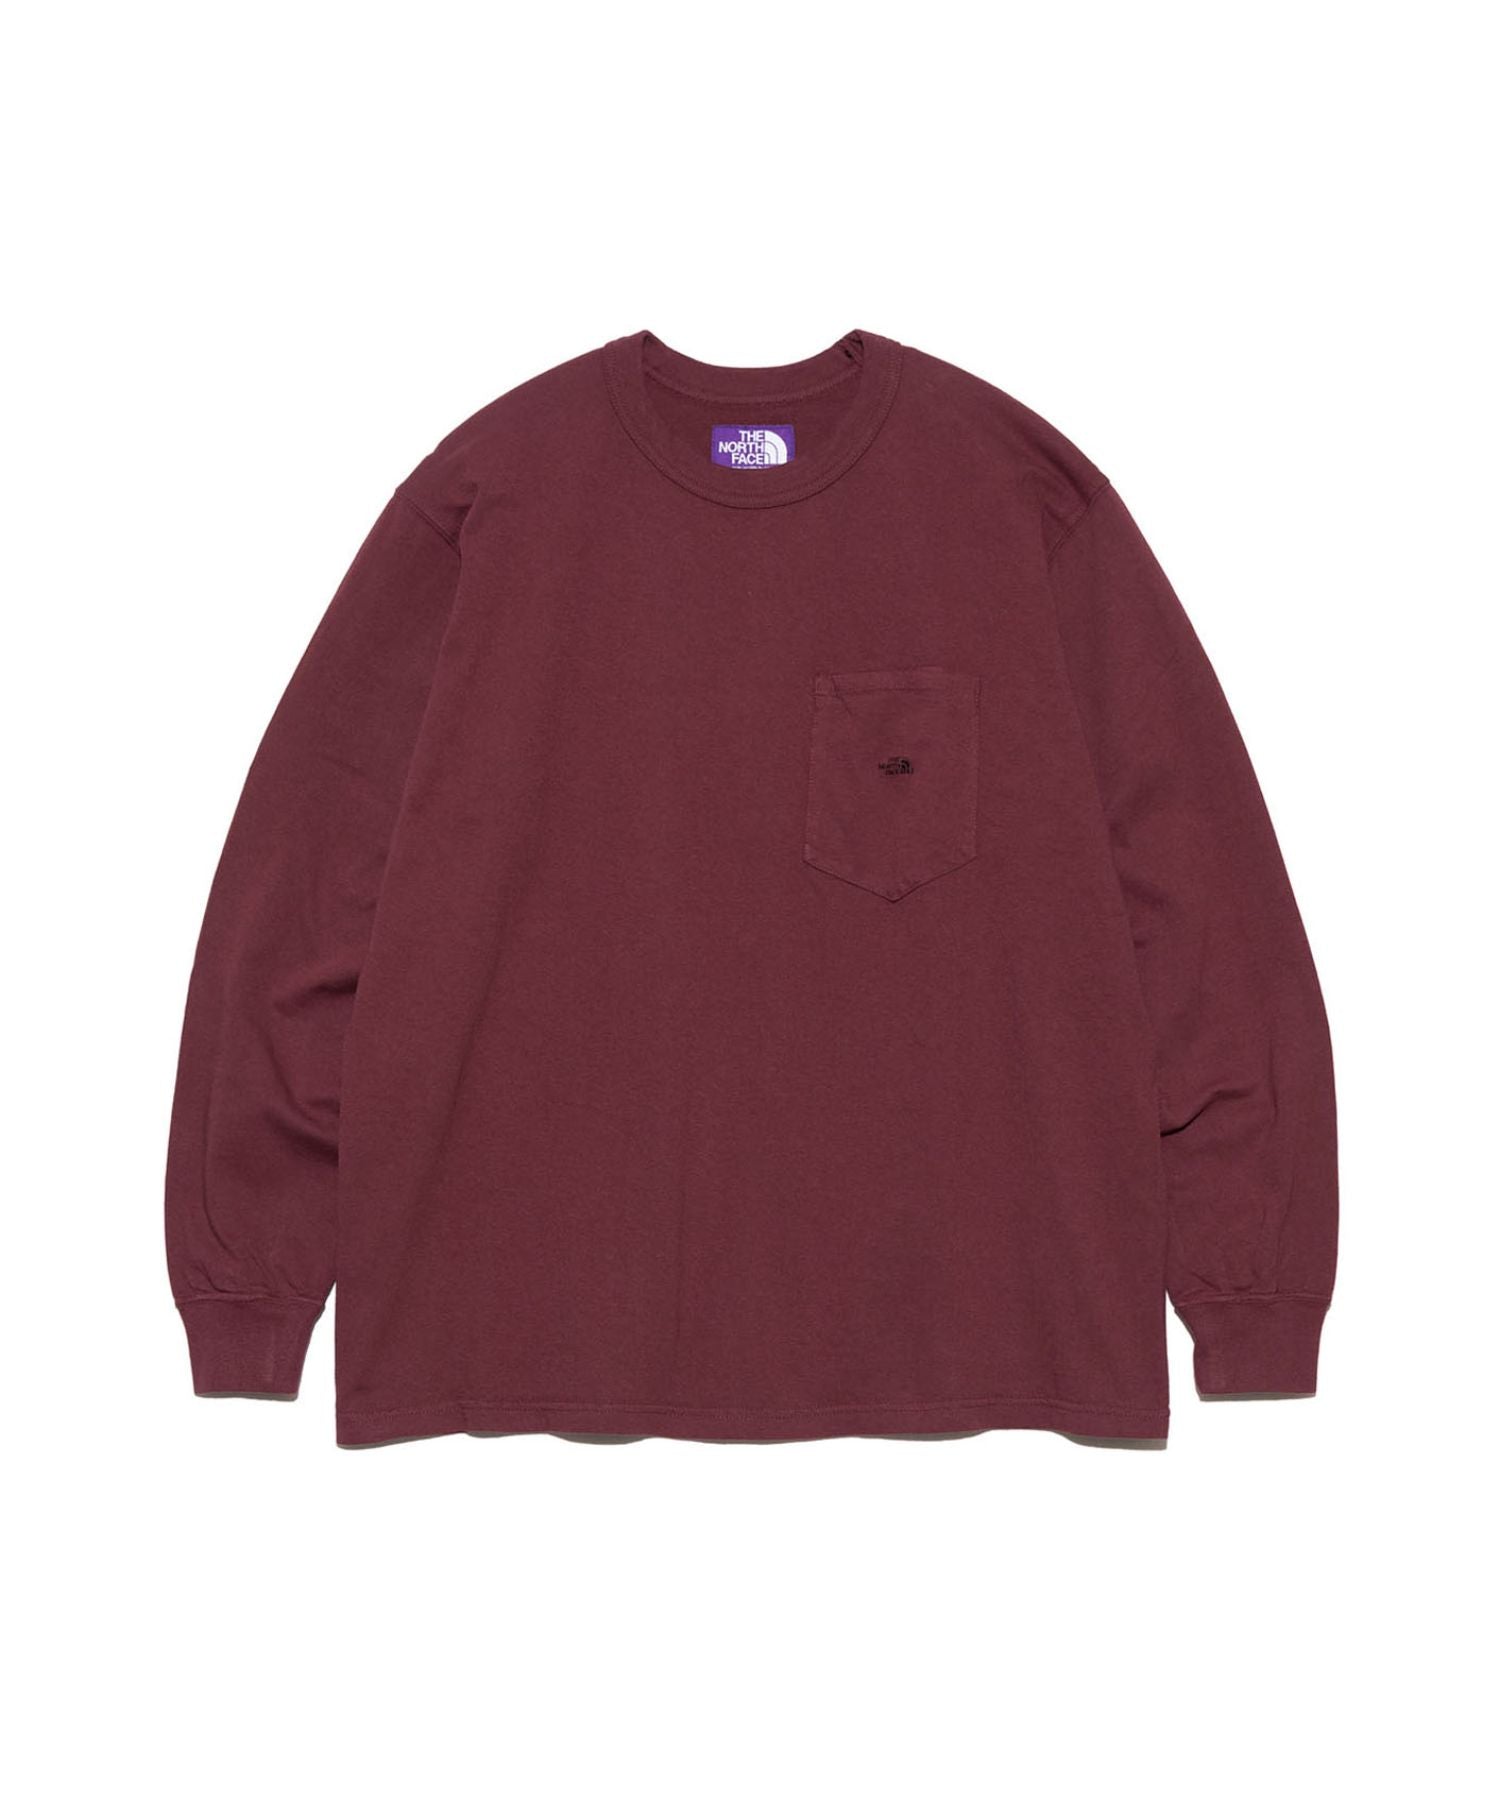 7oz Long Sleeve Pocket Tee - THE NORTH FACE PURPLE LABEL (ザ 